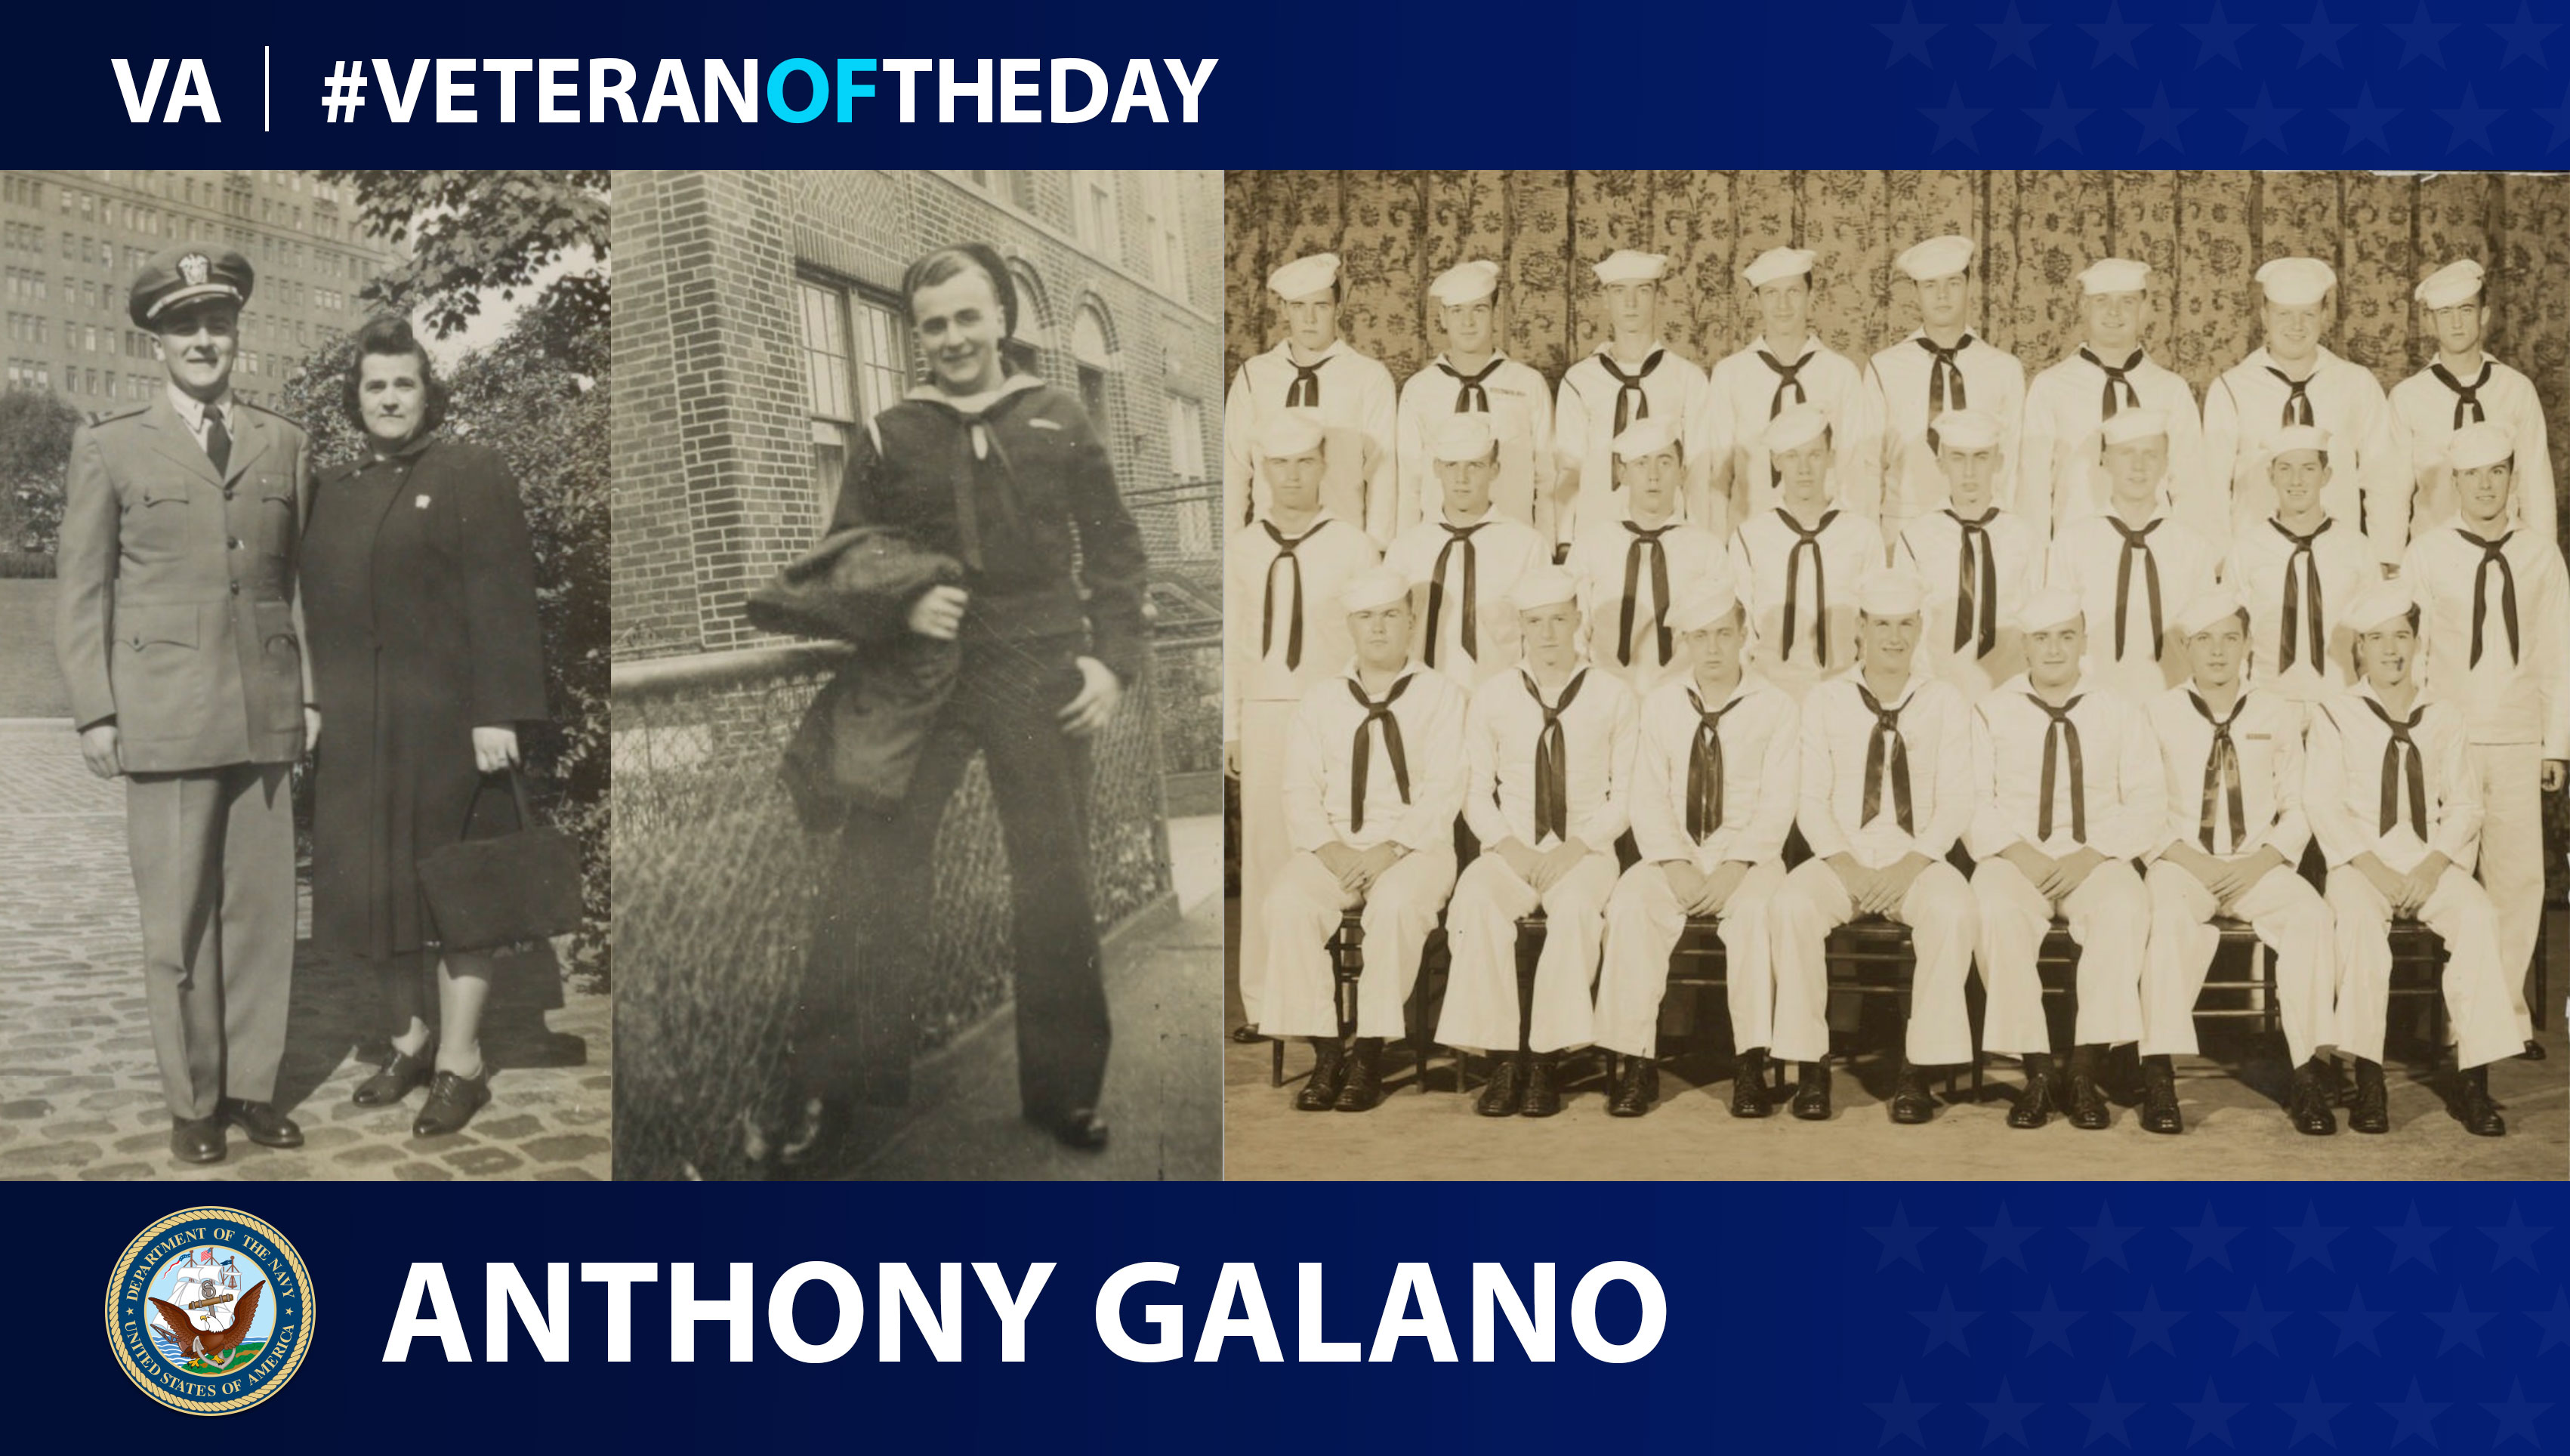 Today's Veteran of the Day is Anthony Golano.